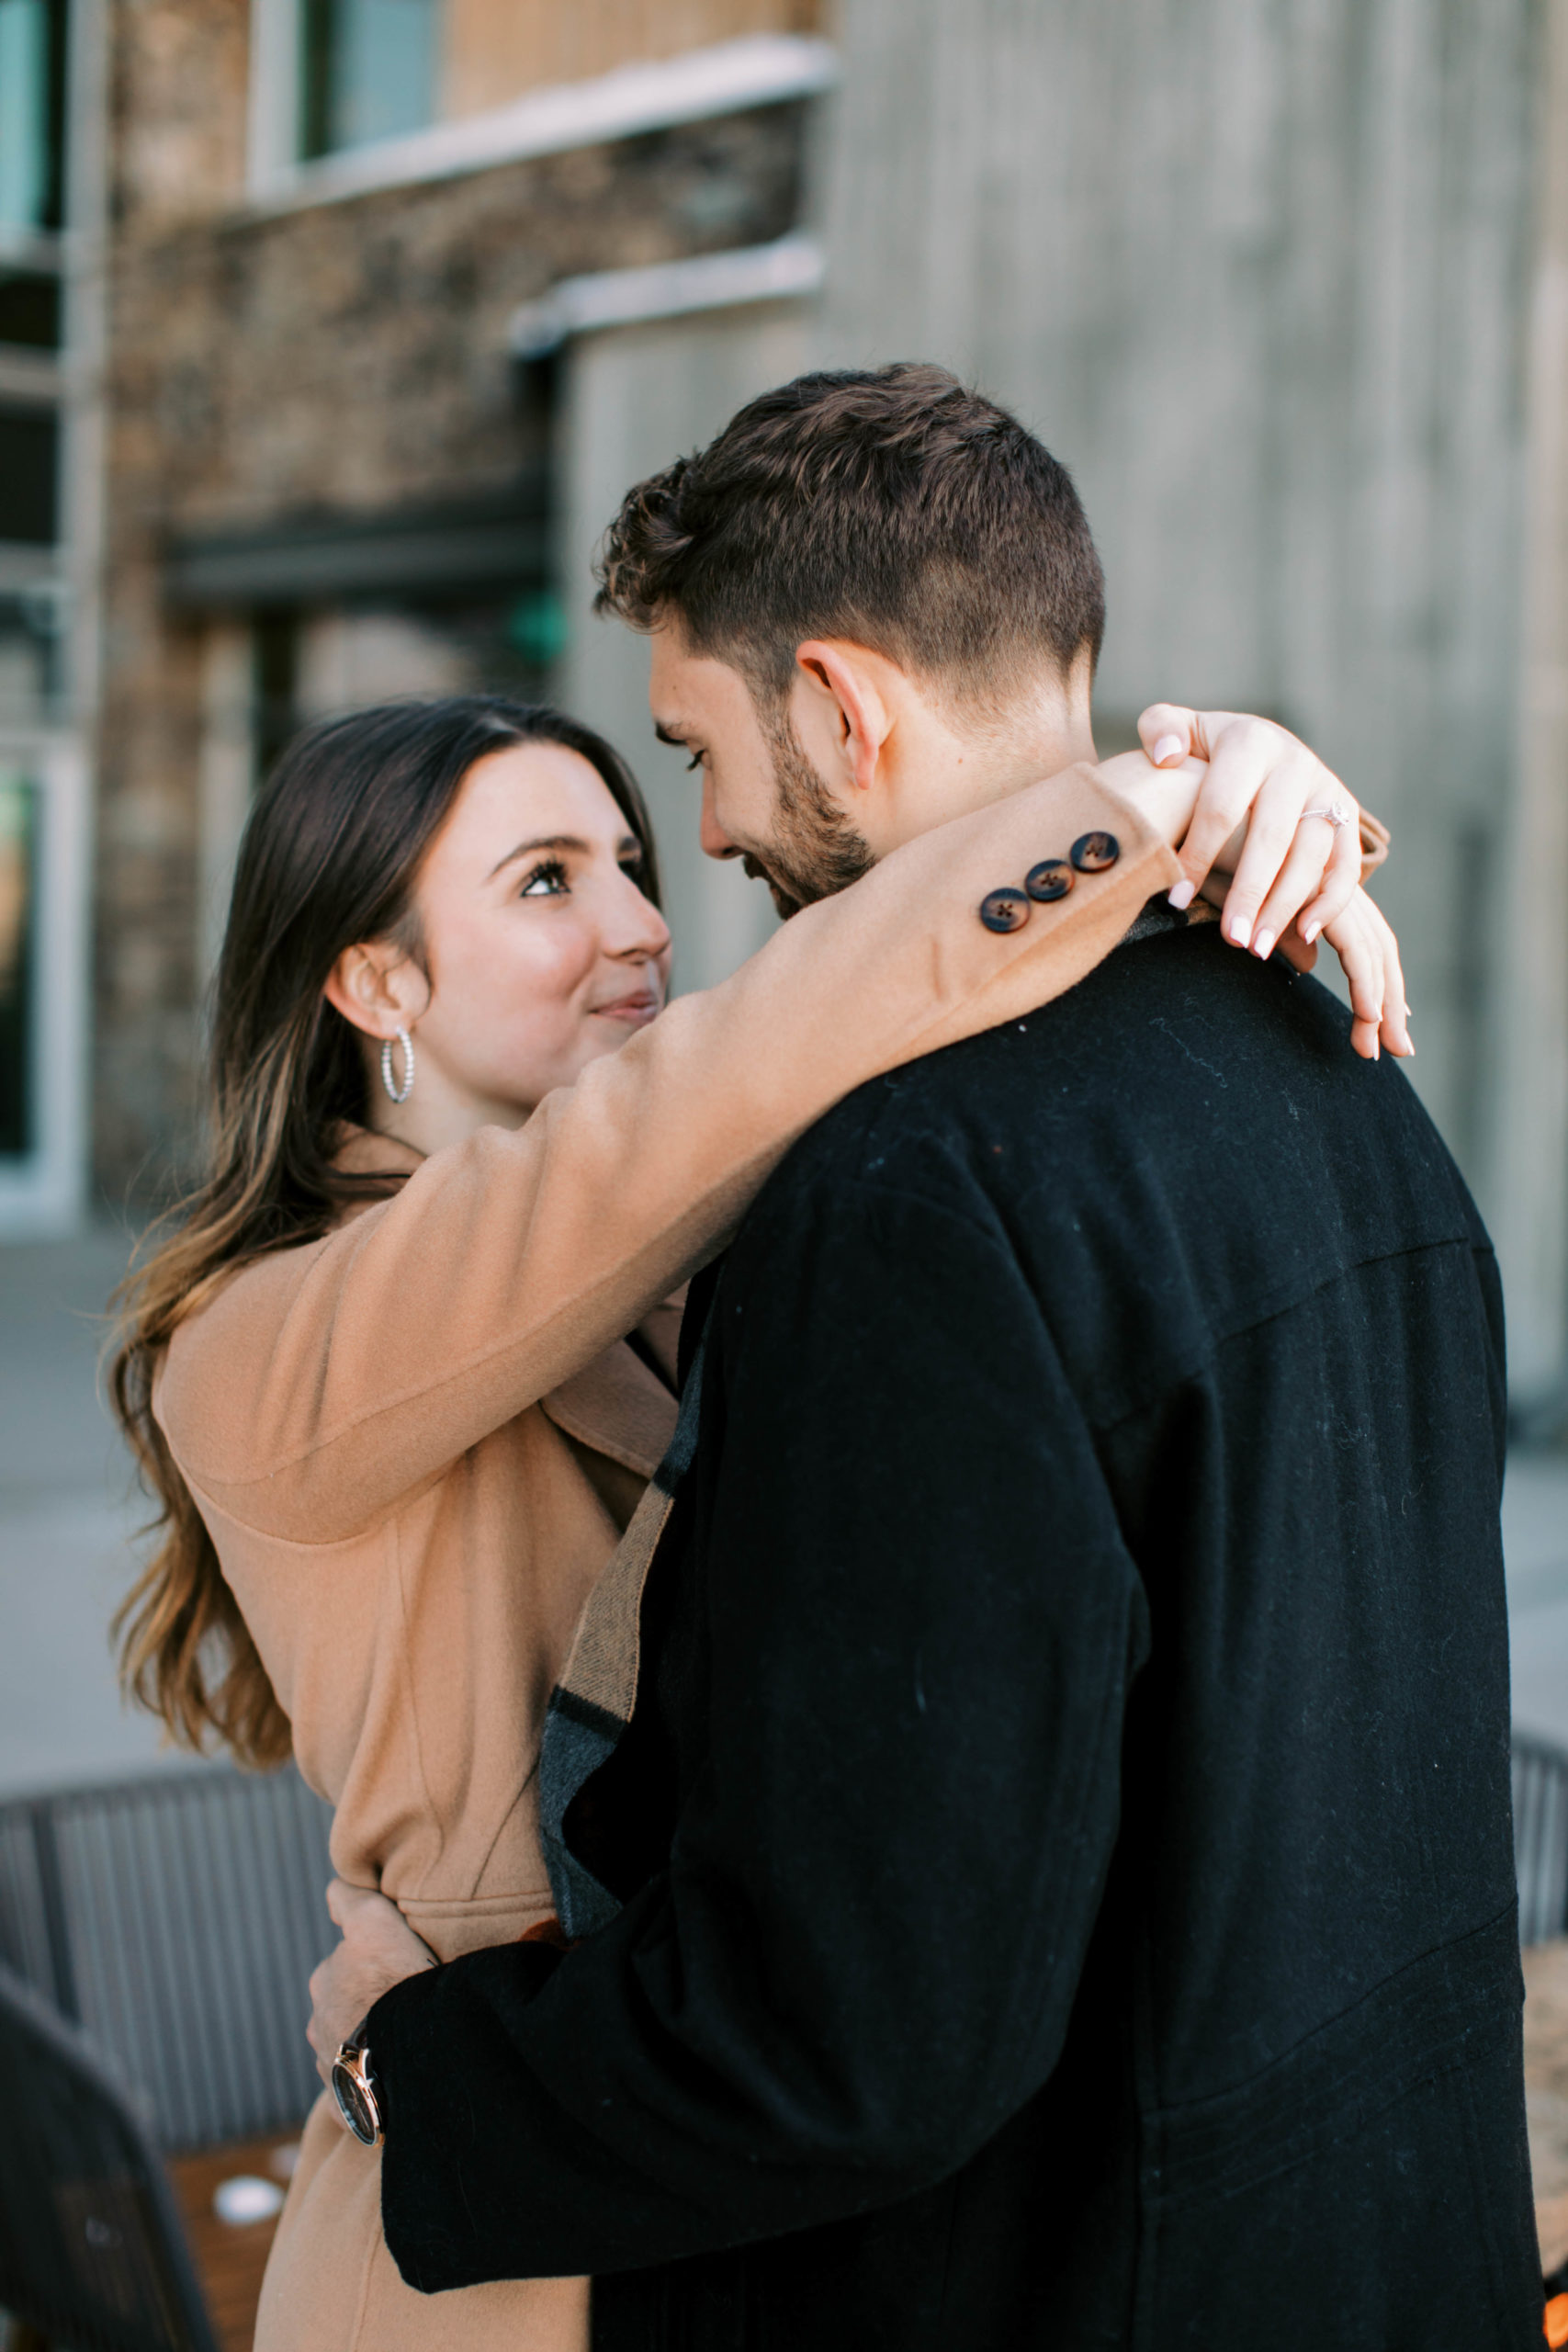 romantic winter engagement photos taken in park city after a surprise proposal at deer valley resort. photo taken by megan robinson photography